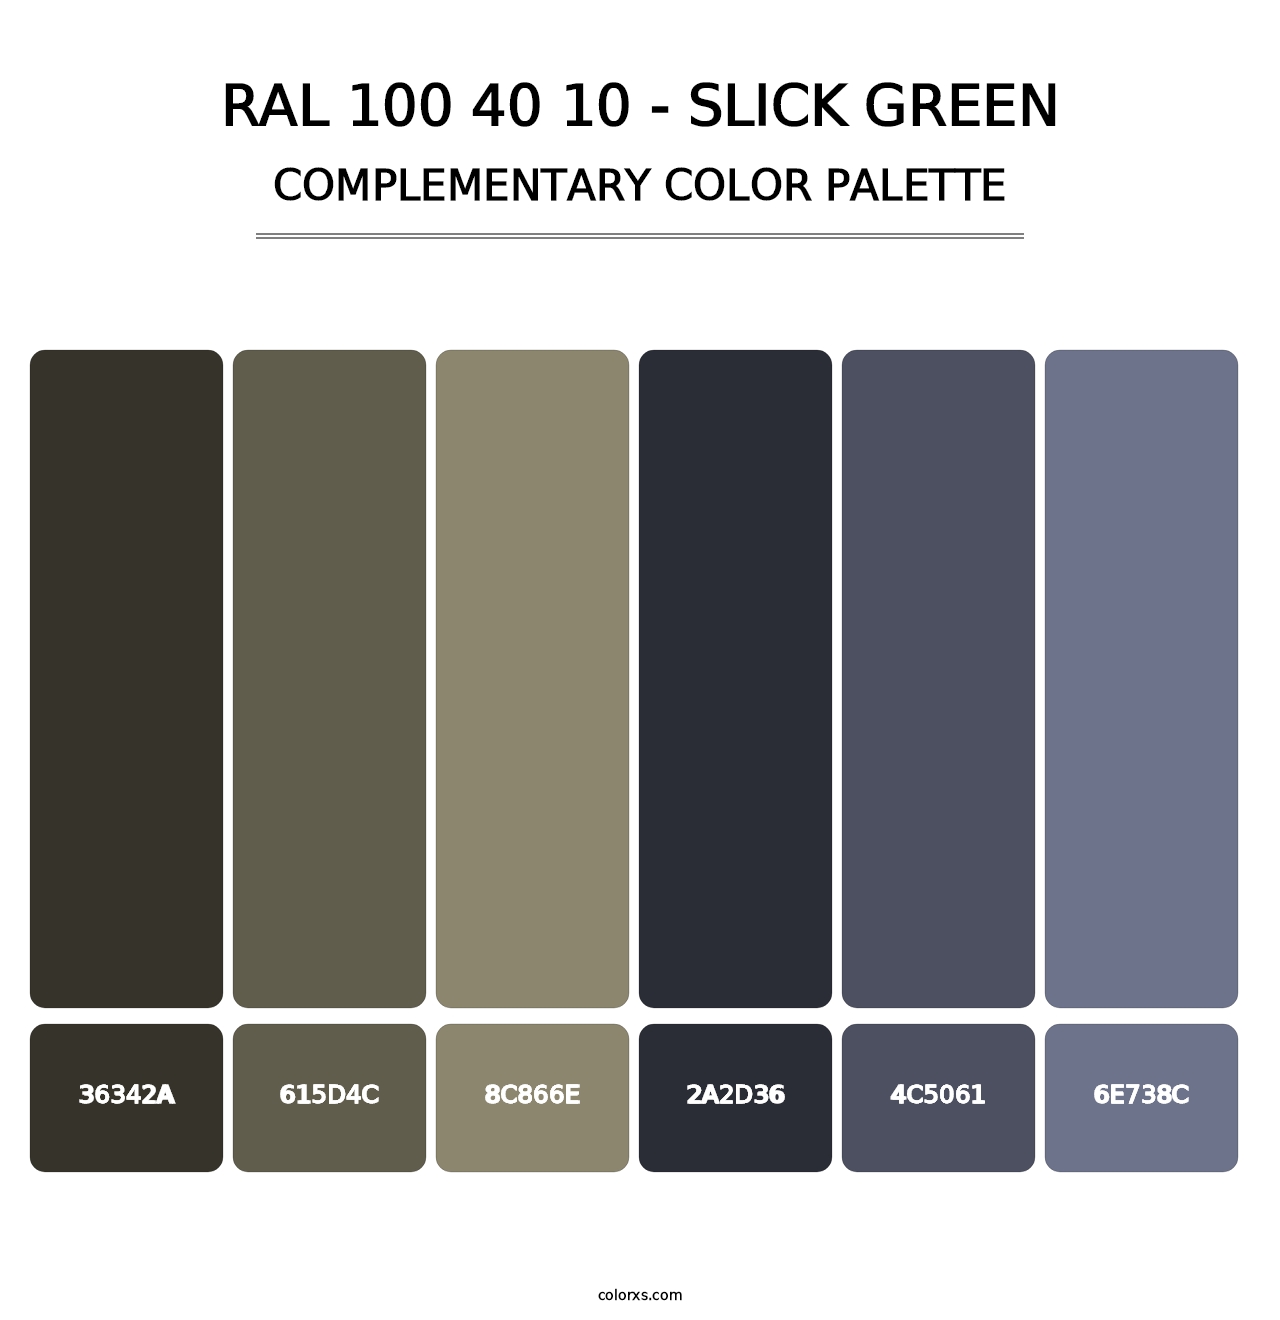 RAL 100 40 10 - Slick Green - Complementary Color Palette